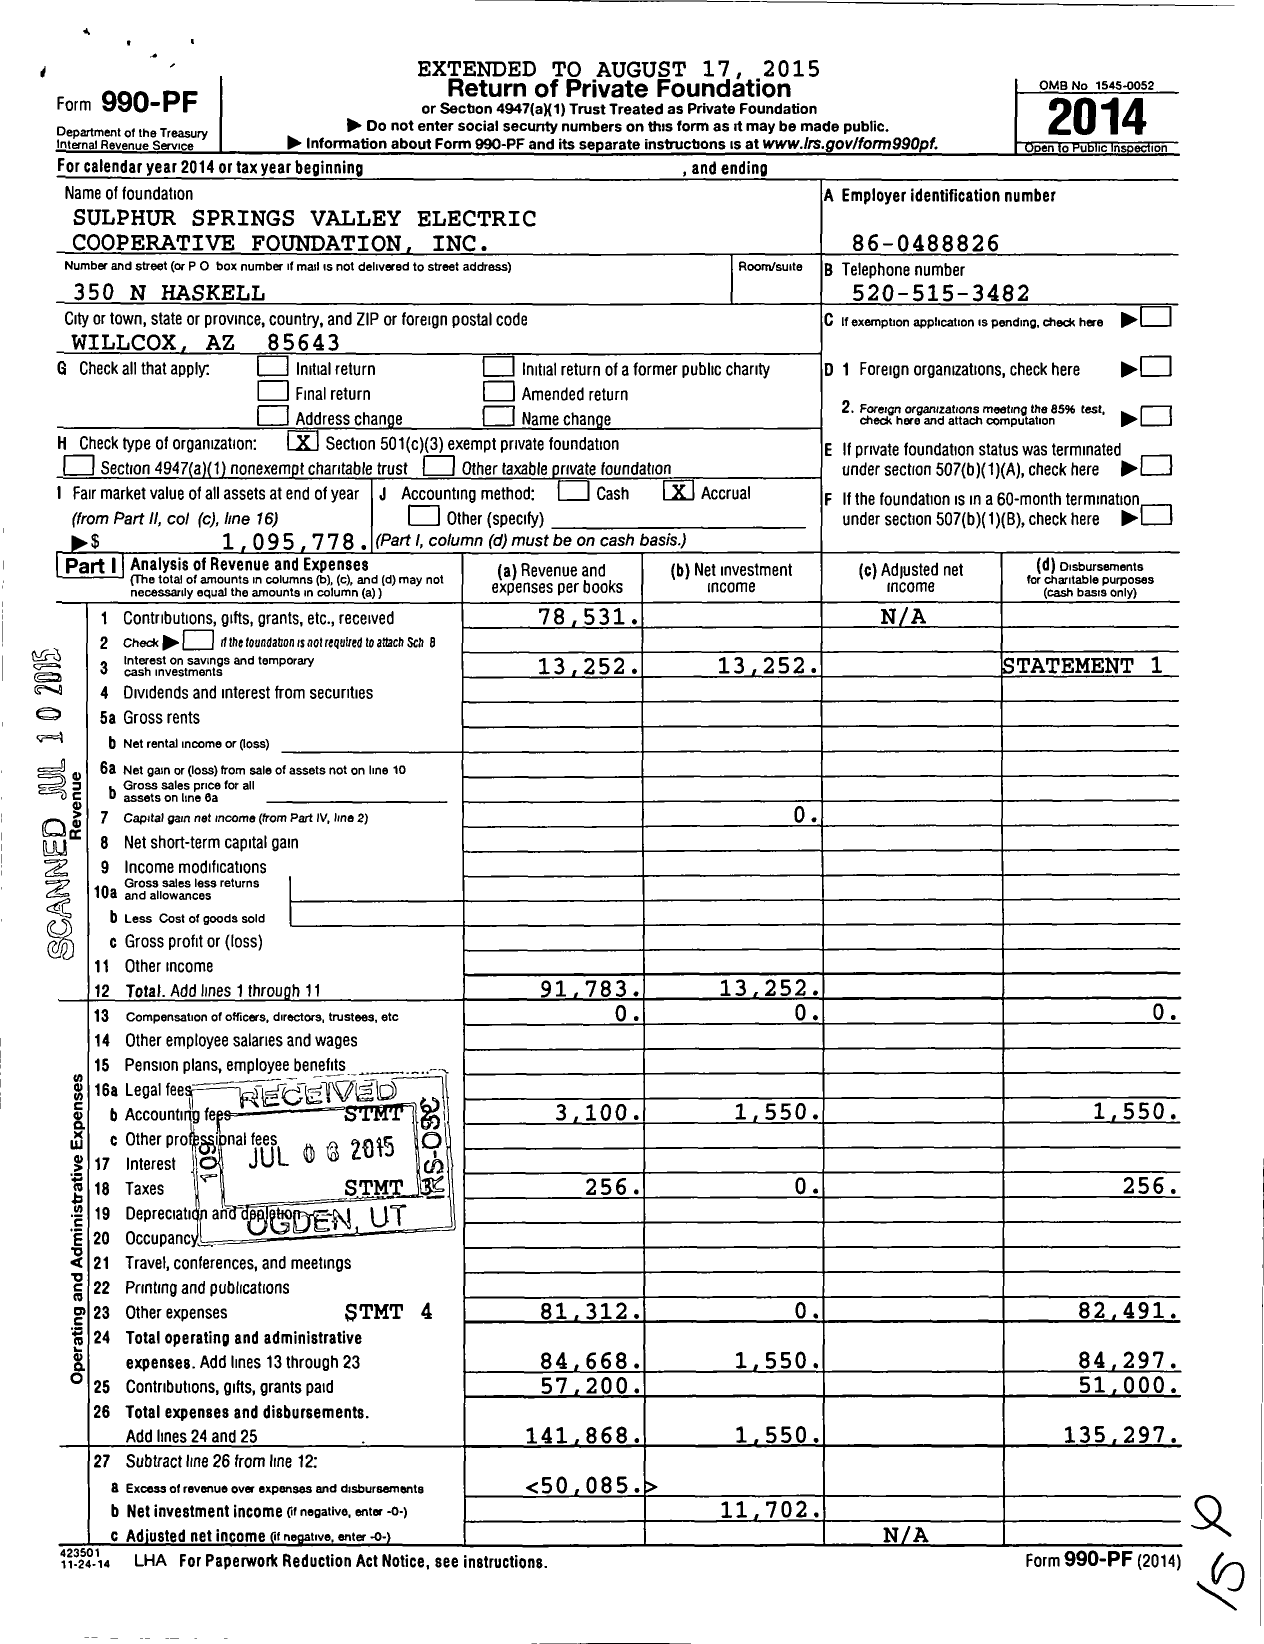 Image of first page of 2014 Form 990PF for Sulphur Springs Valley Electric Cooperative Foundation